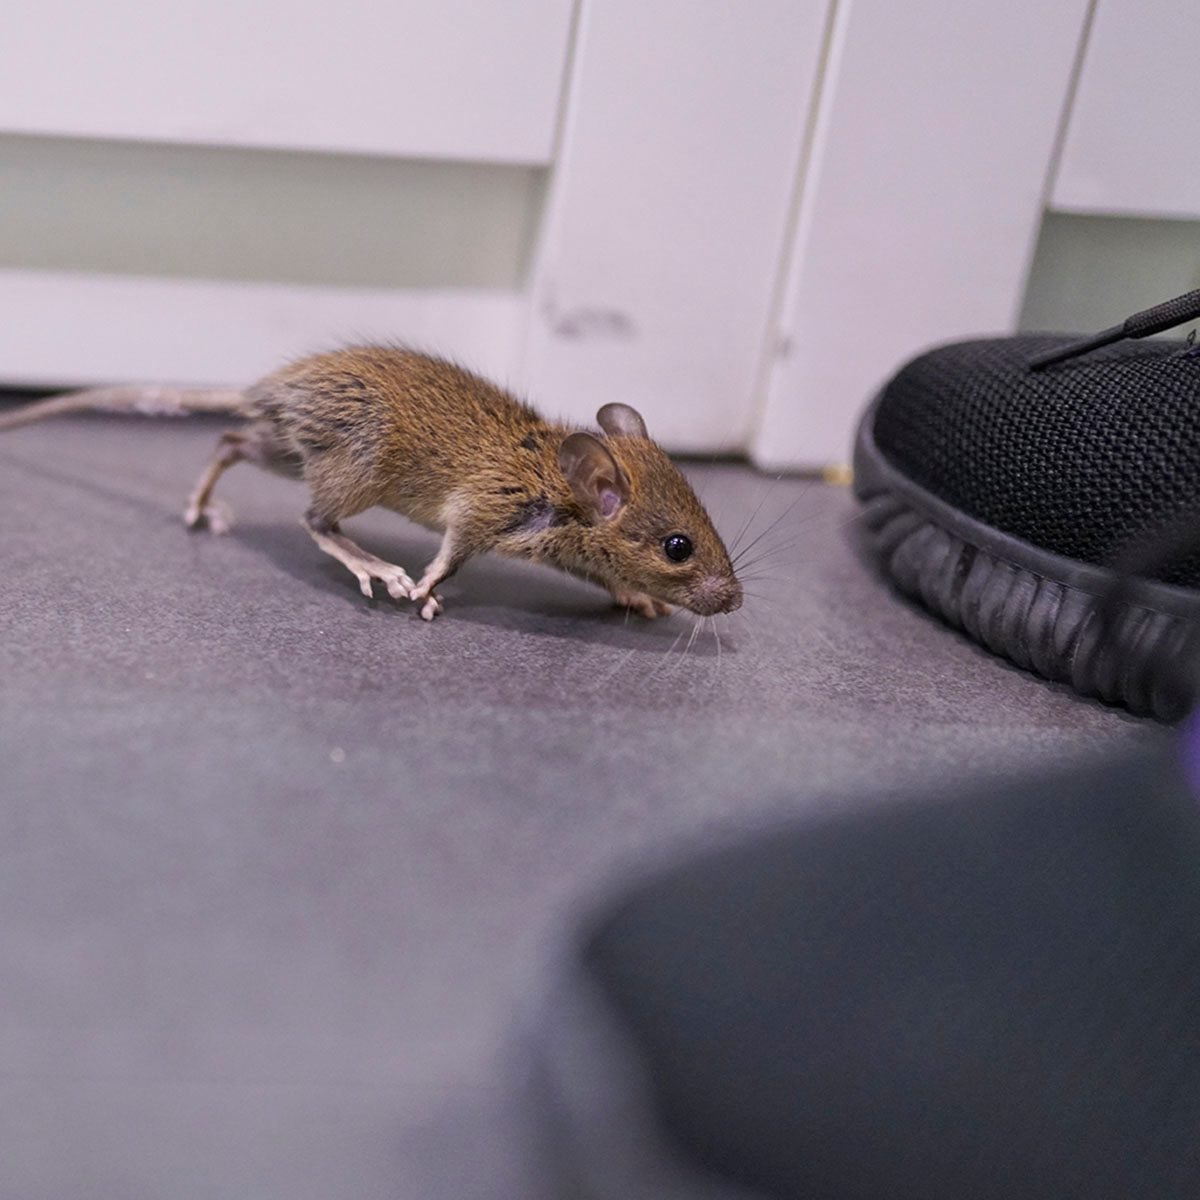 How to Help Get Rid of Mice in the Kitchen